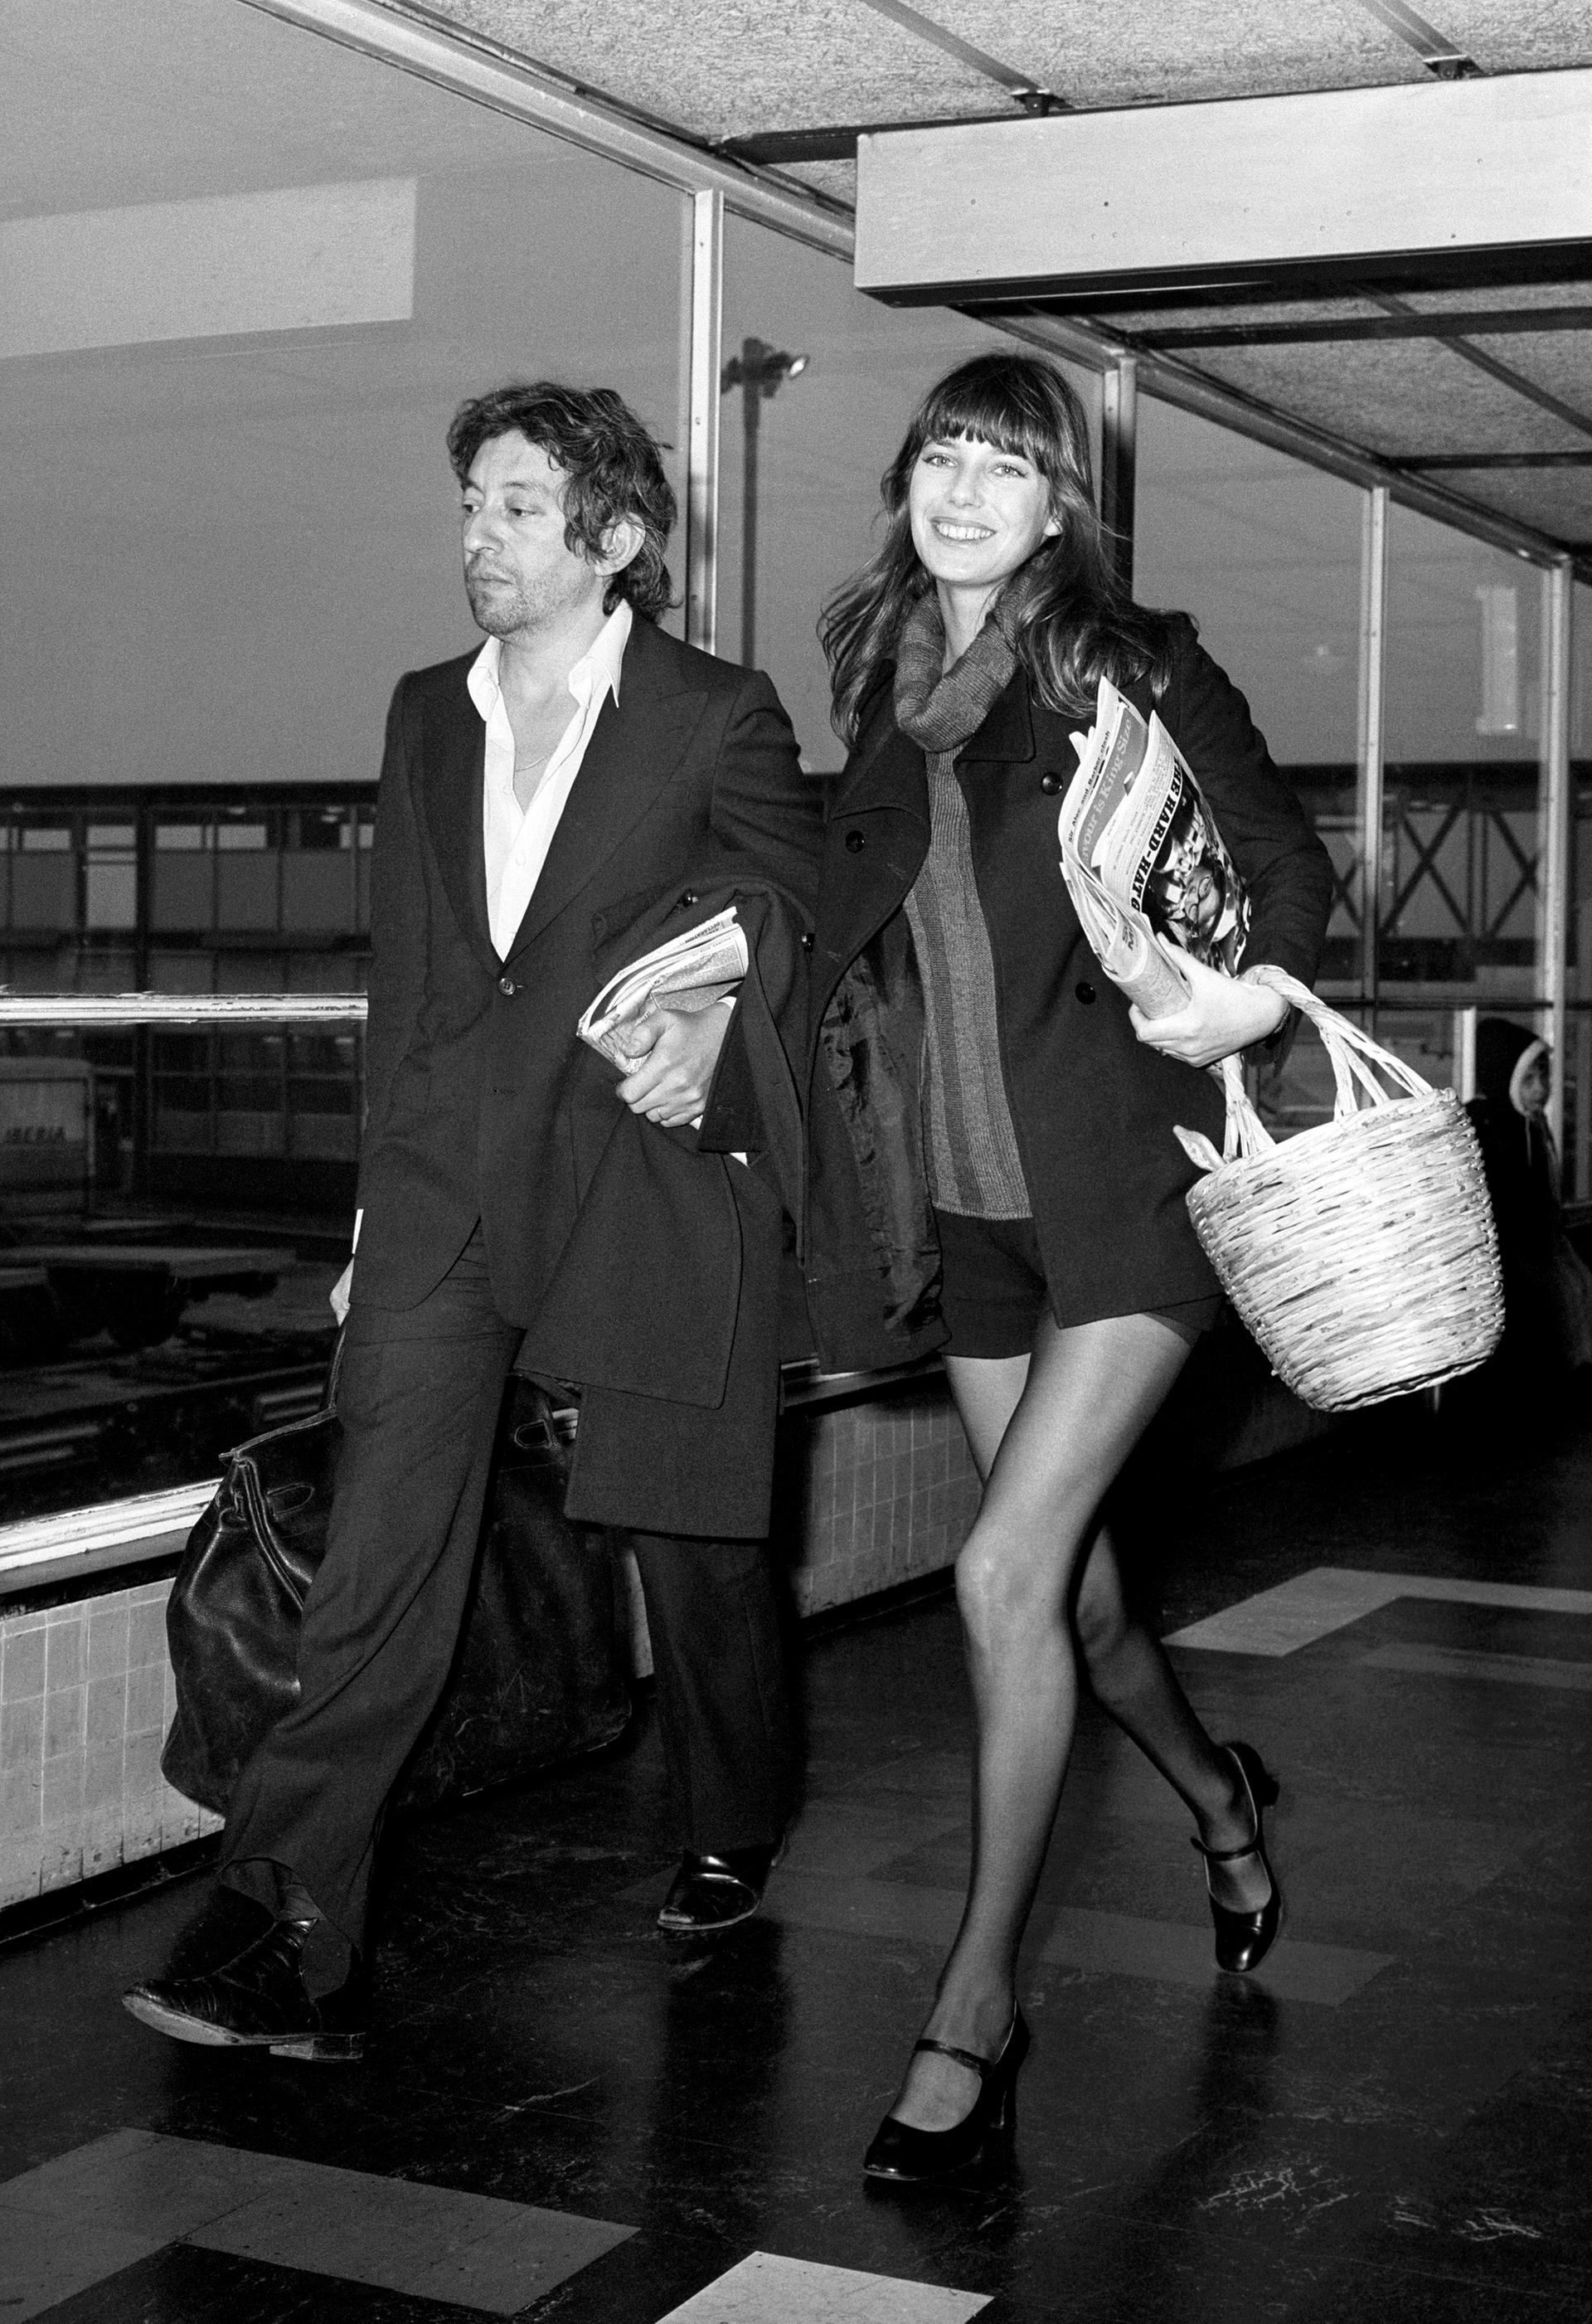 Zara basket bags. Jane Birkin is among the low cost multi-brand's style  icons